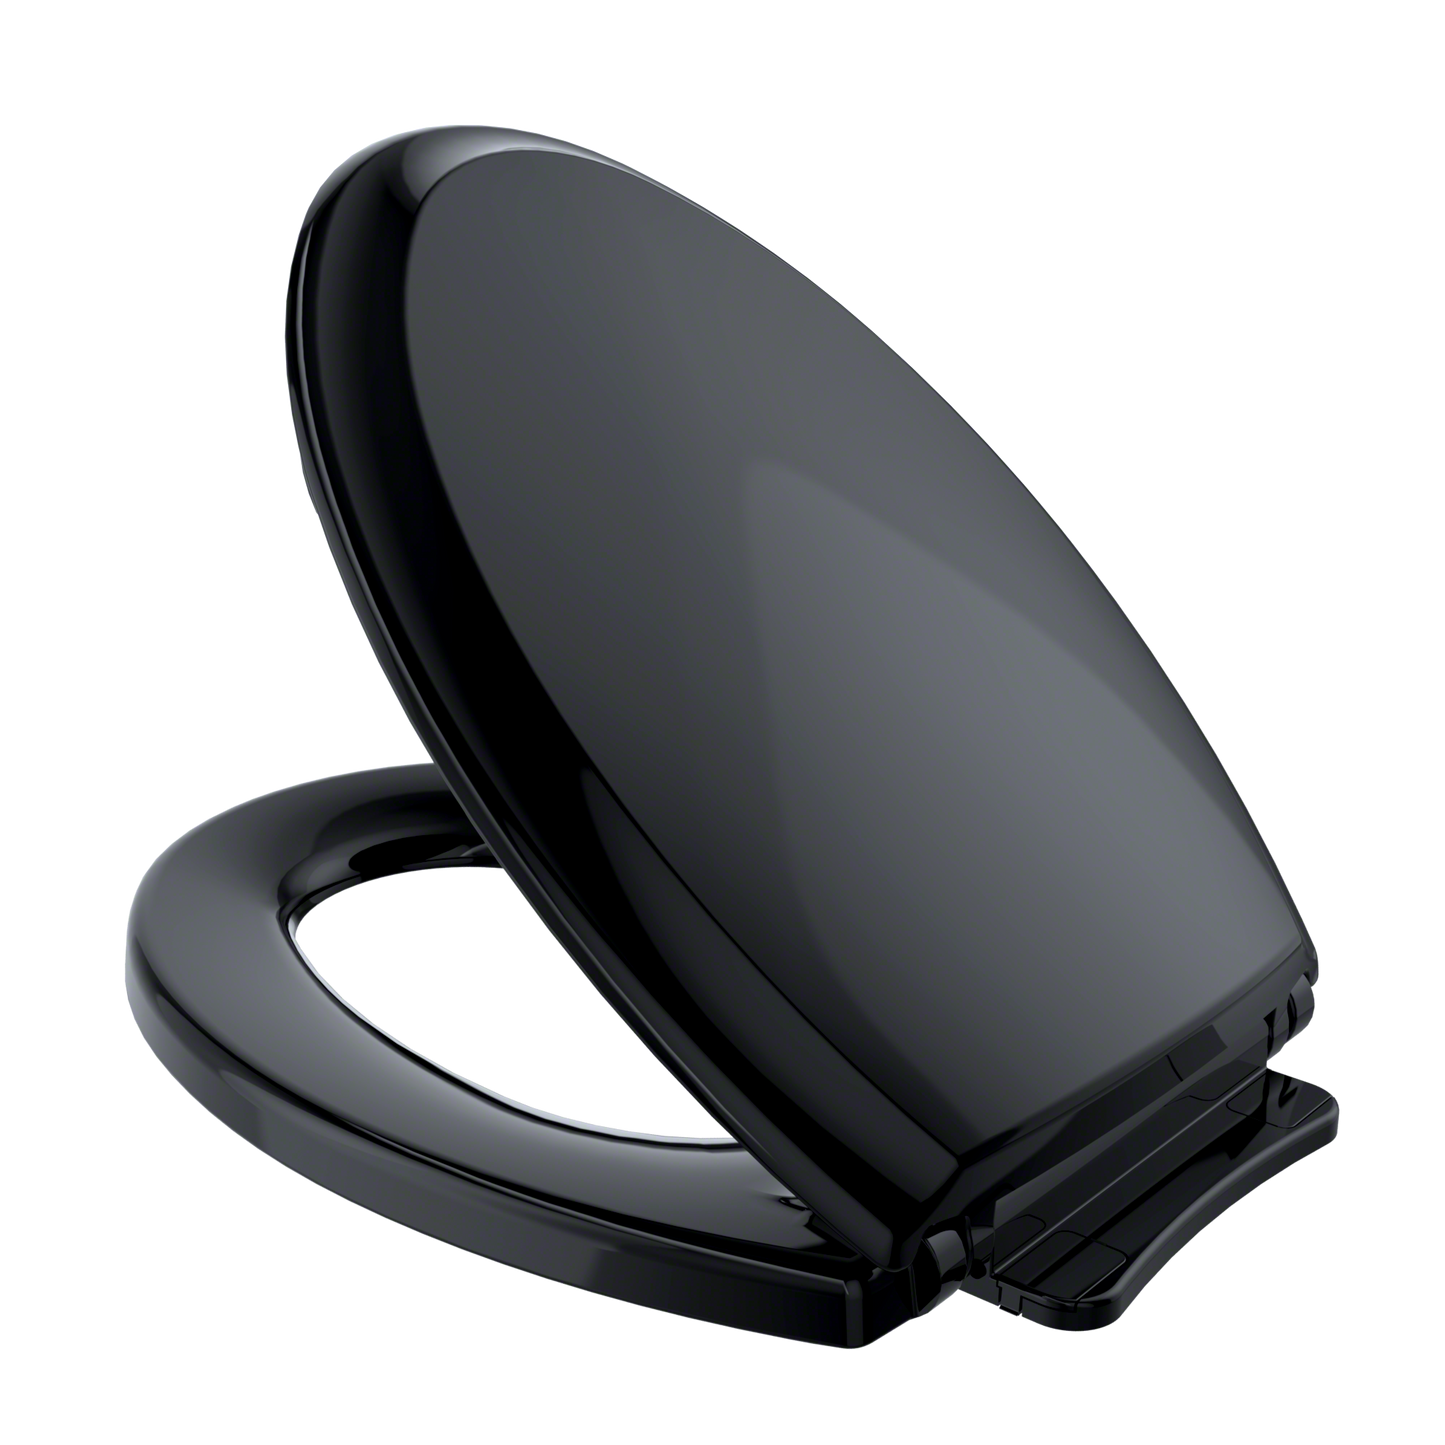 SS224#51 - Guinevere SoftClose Elongated Toilet Seat - Ebony